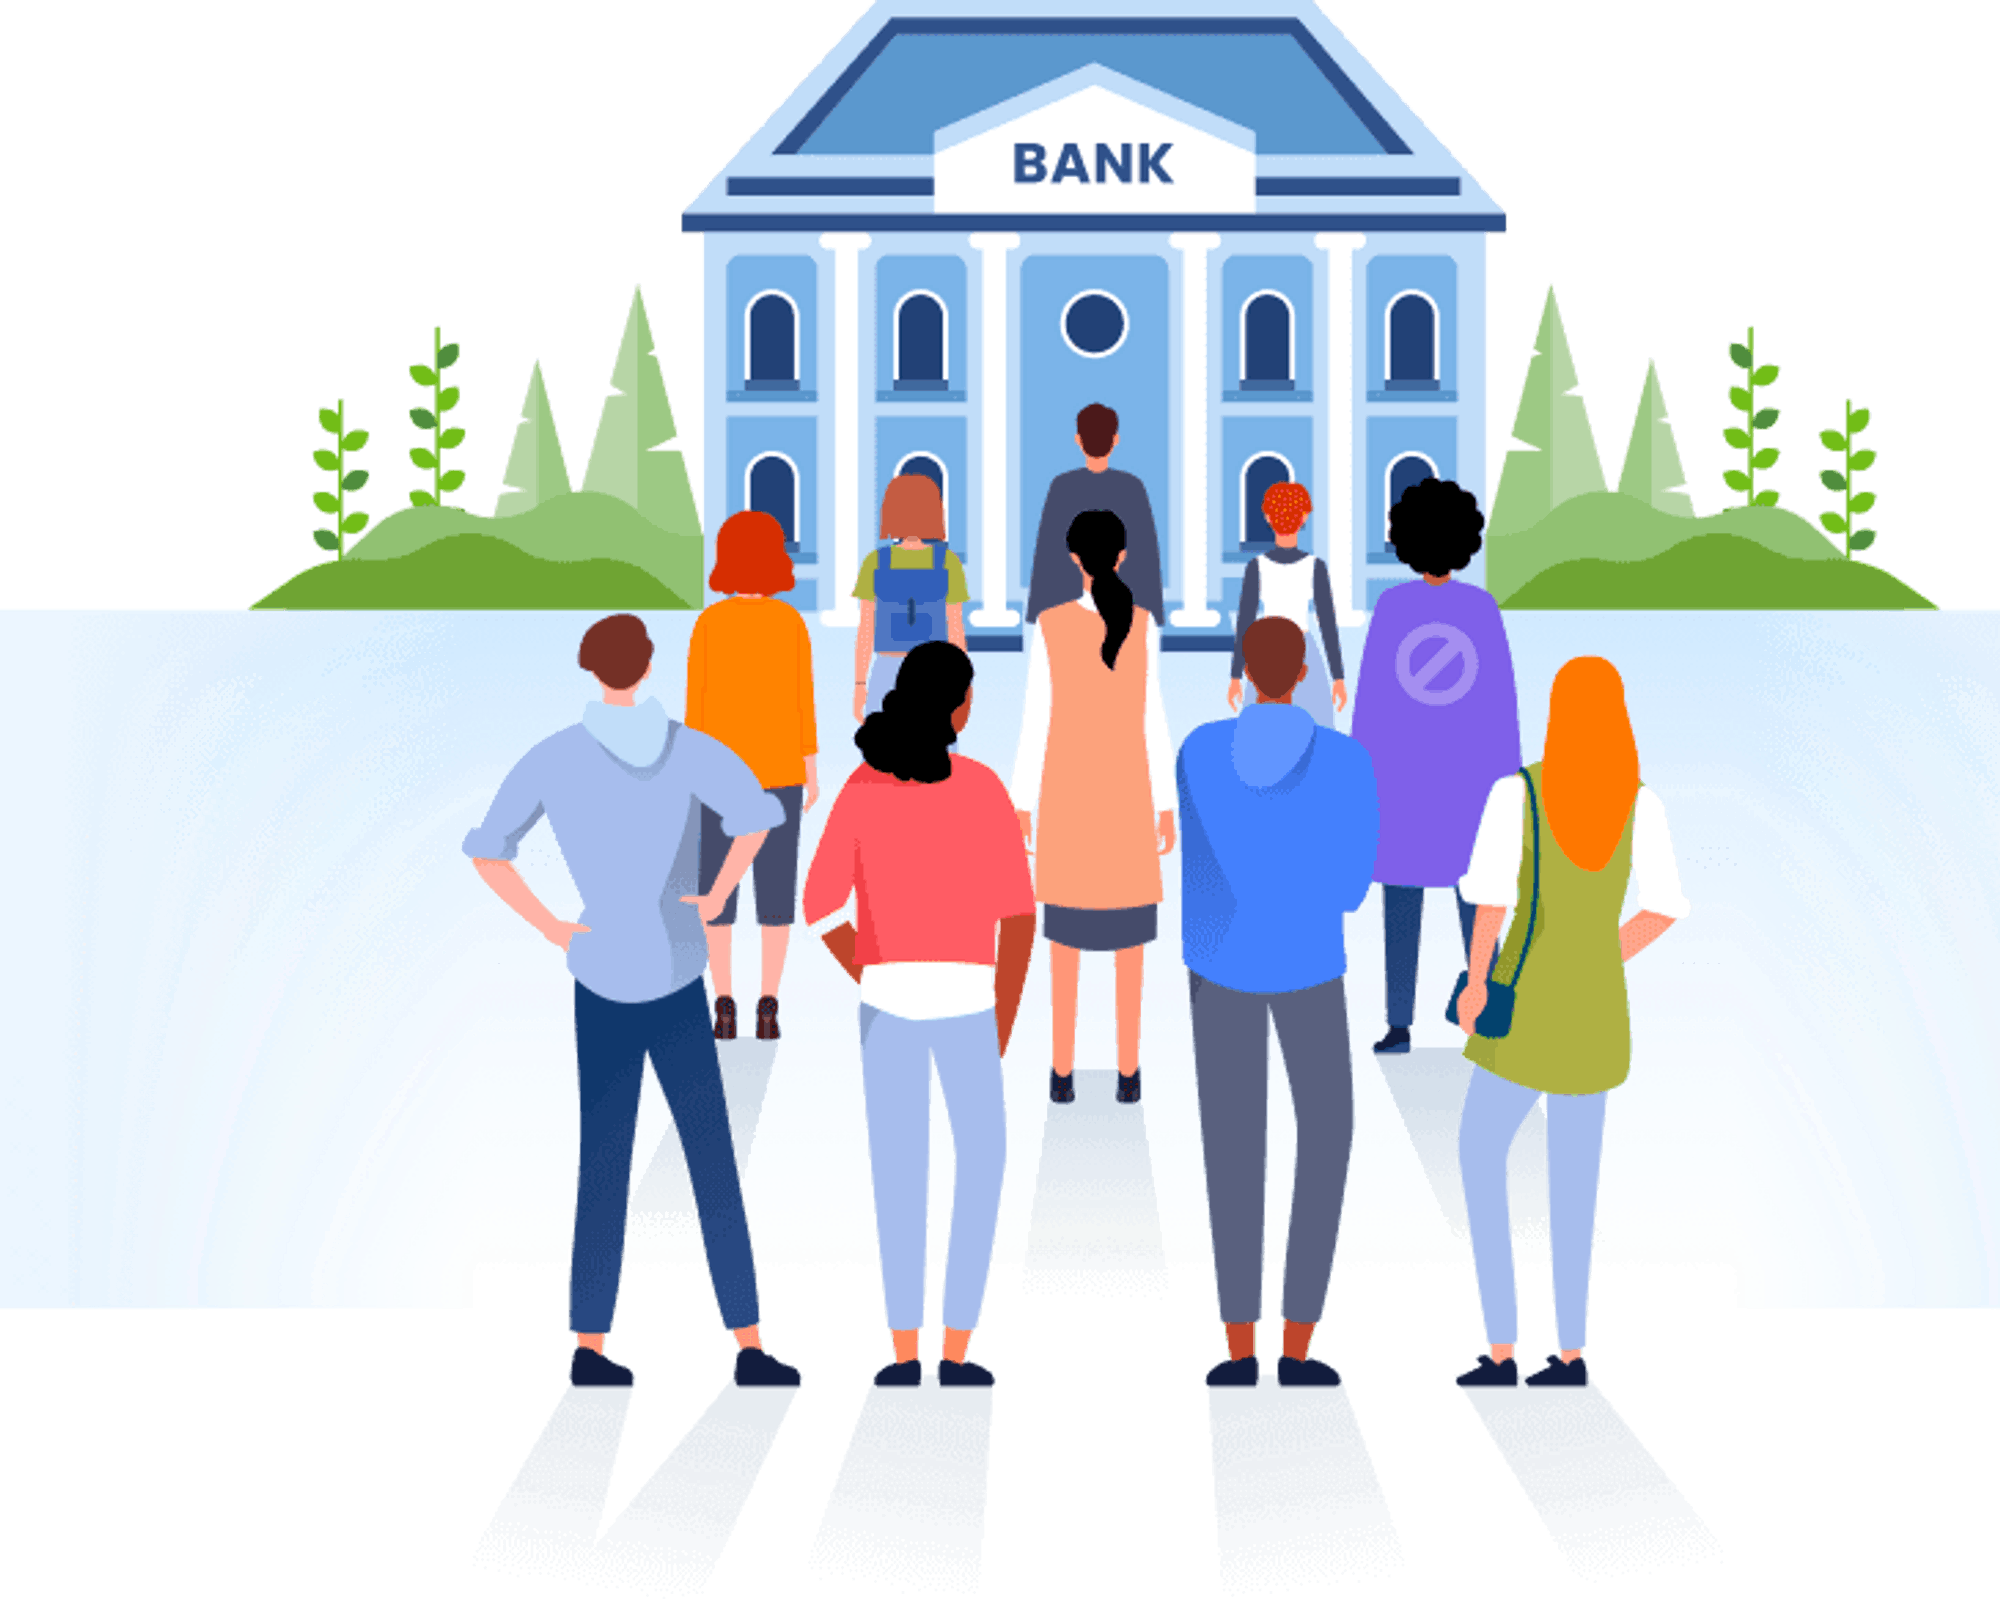 Graphic of people in front of bank